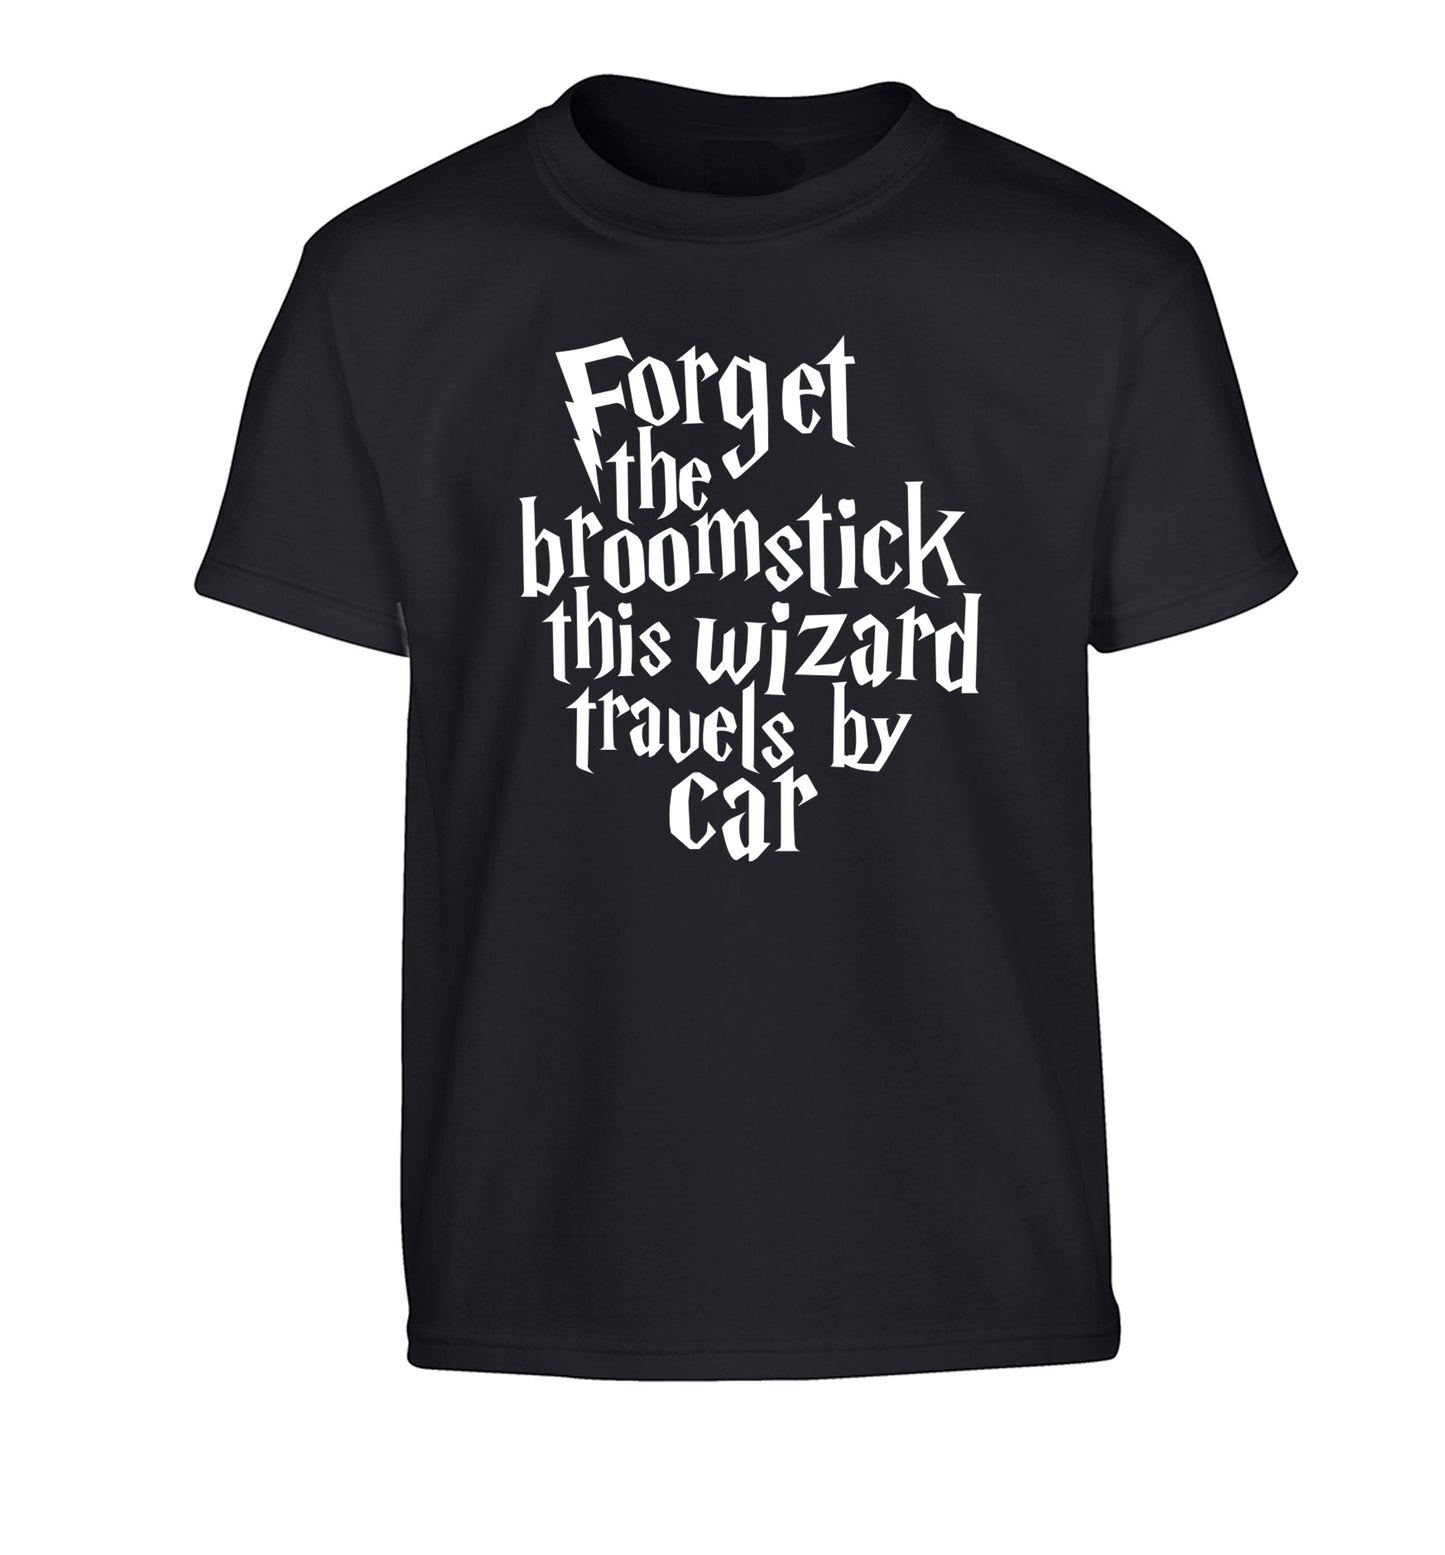 Forget the broomstick this wizard travels by car Children's black Tshirt 12-14 Years